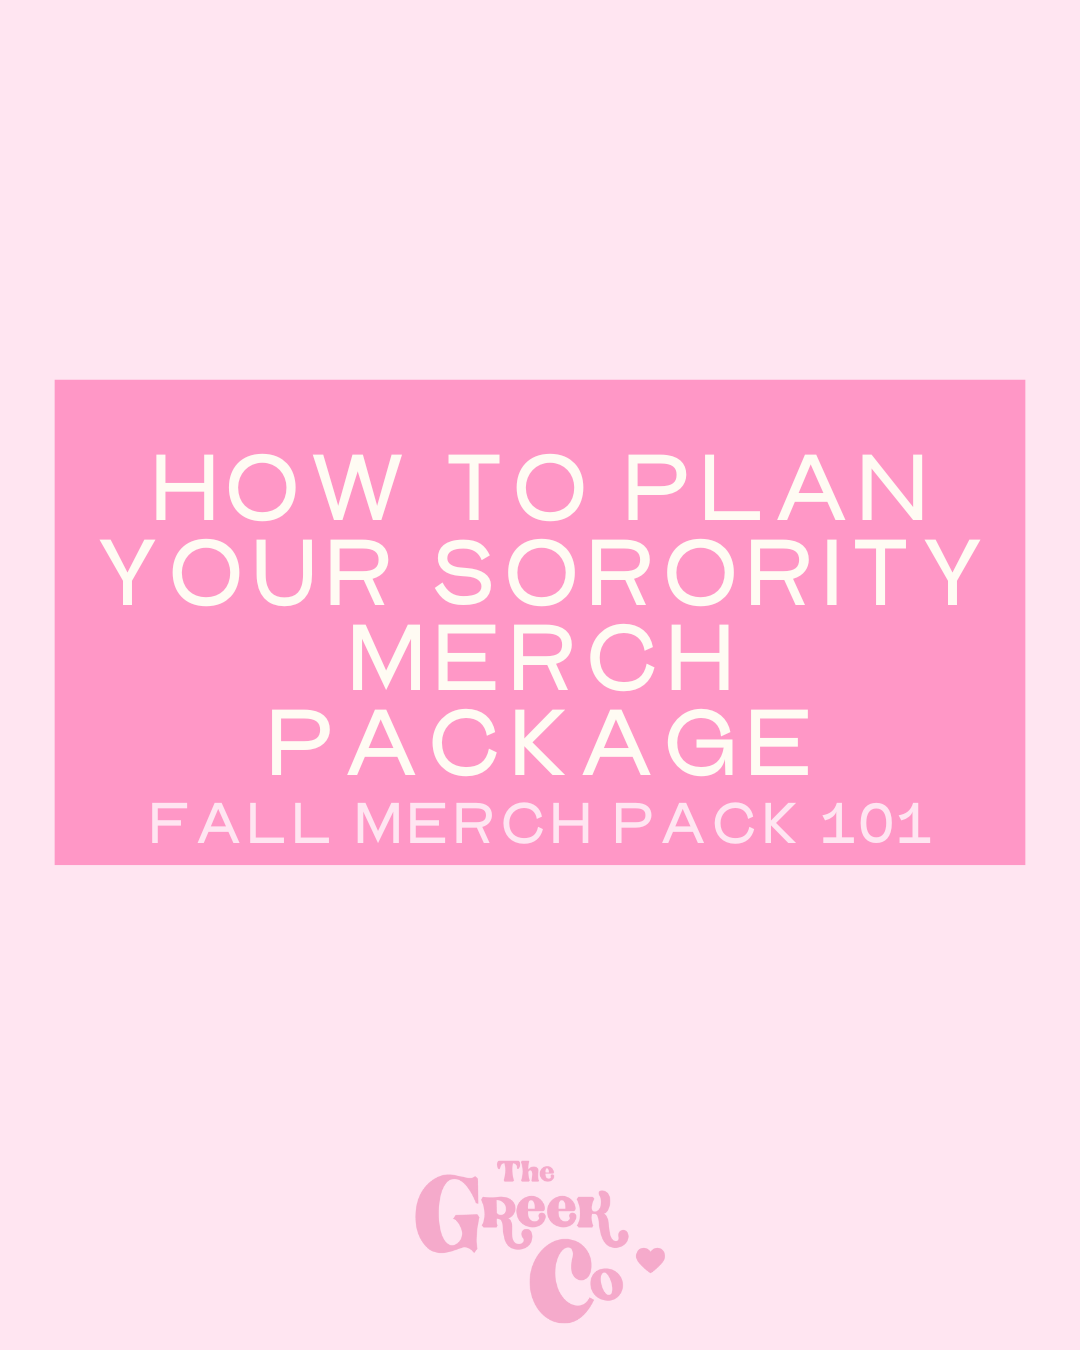 How to Plan Your Sorority Merchandise Package